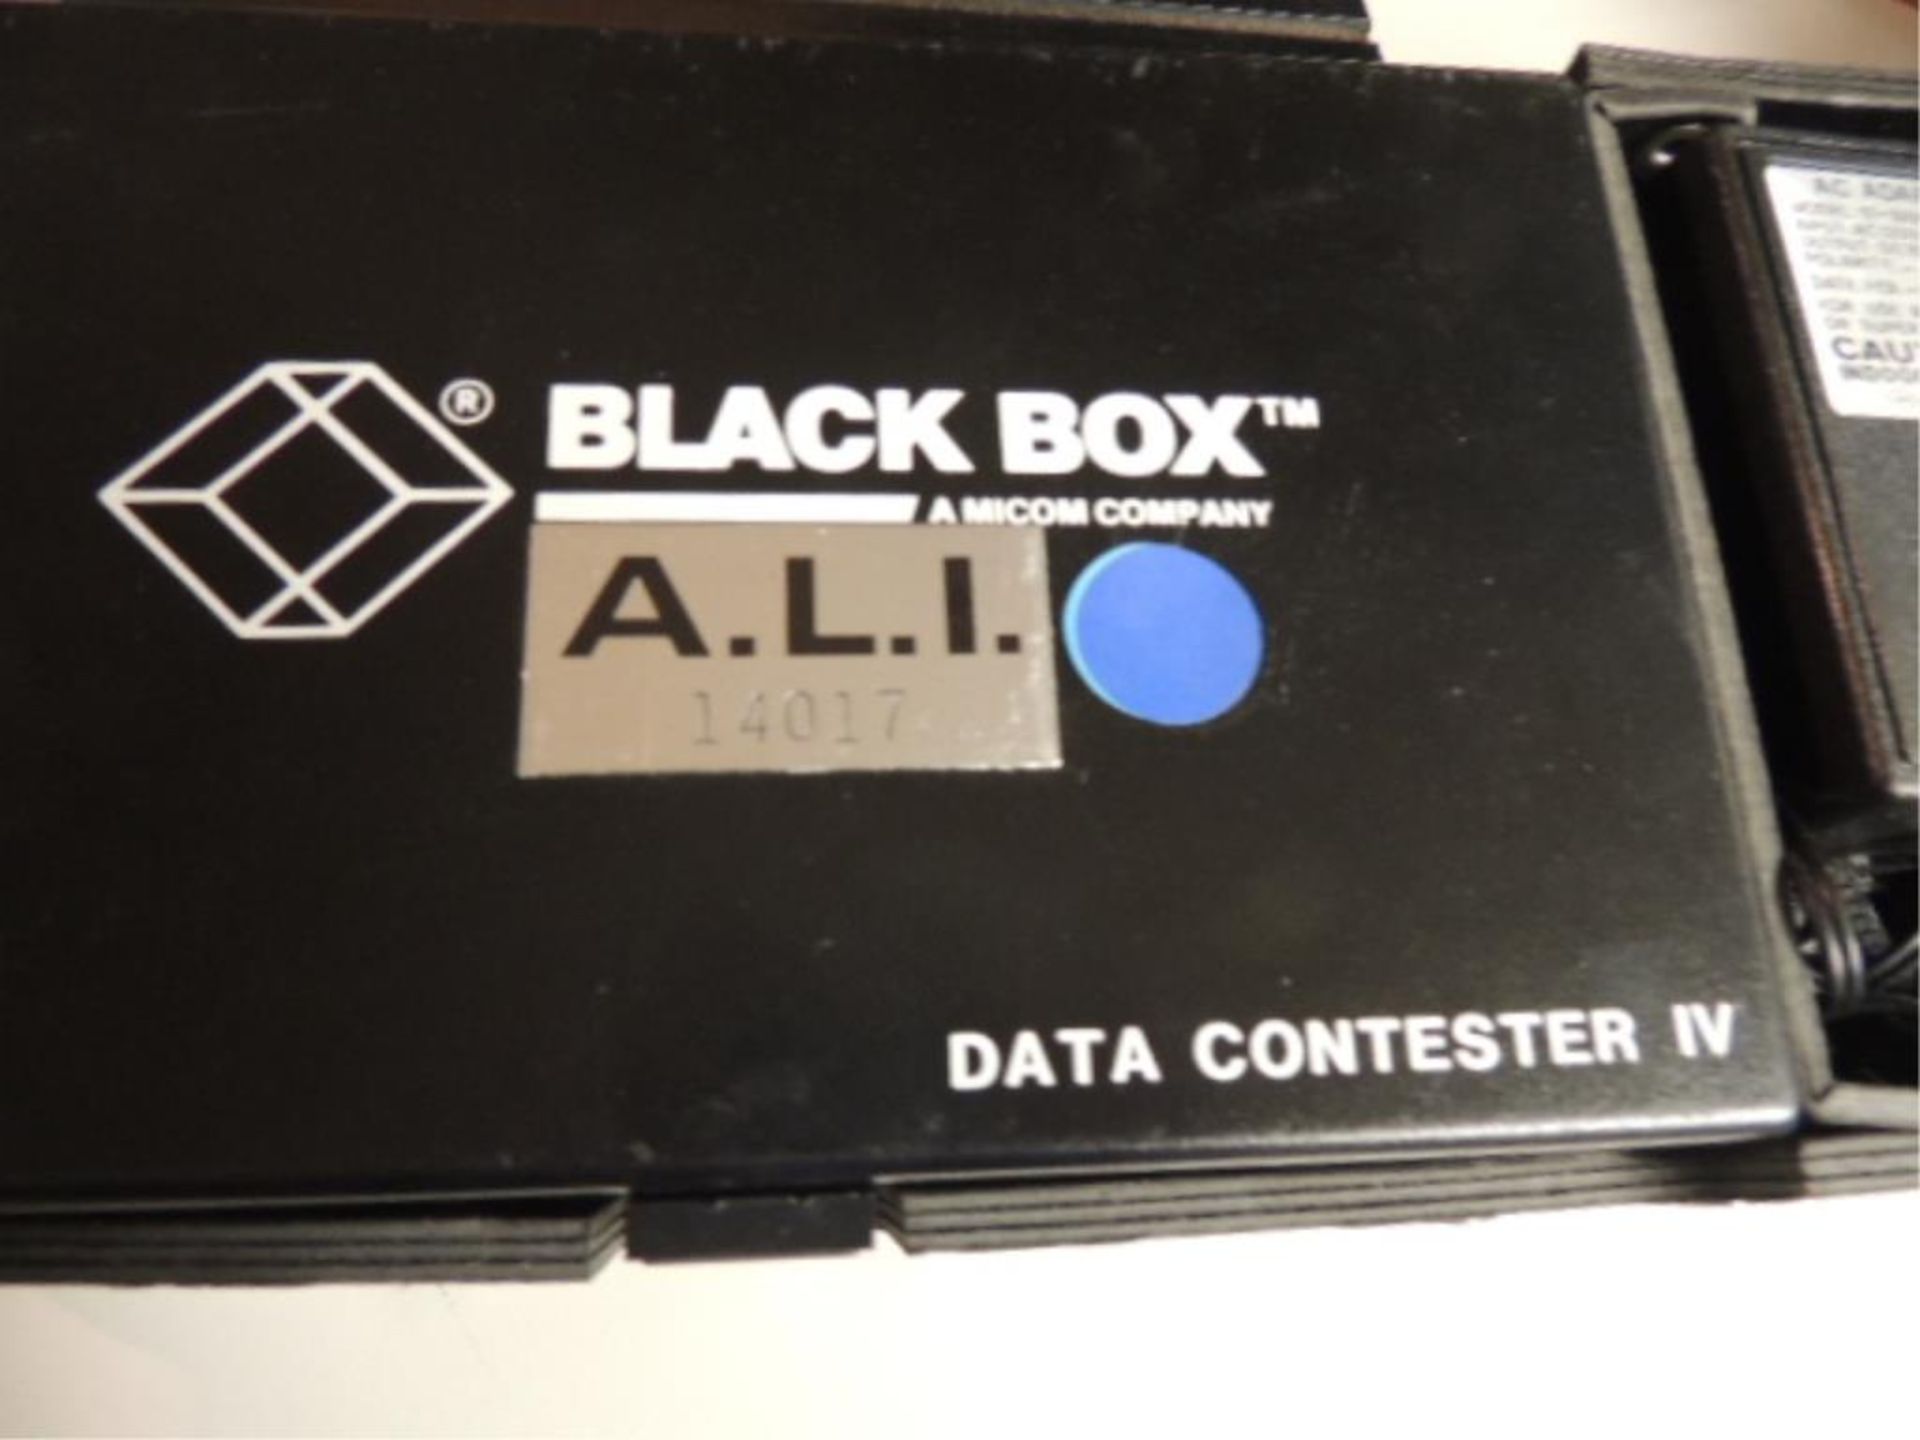 Micon DT 025 Tester; Black box data contester IV. HIT# 2192402. Loc: 901 cage. Asset Located at 64 - Image 2 of 5